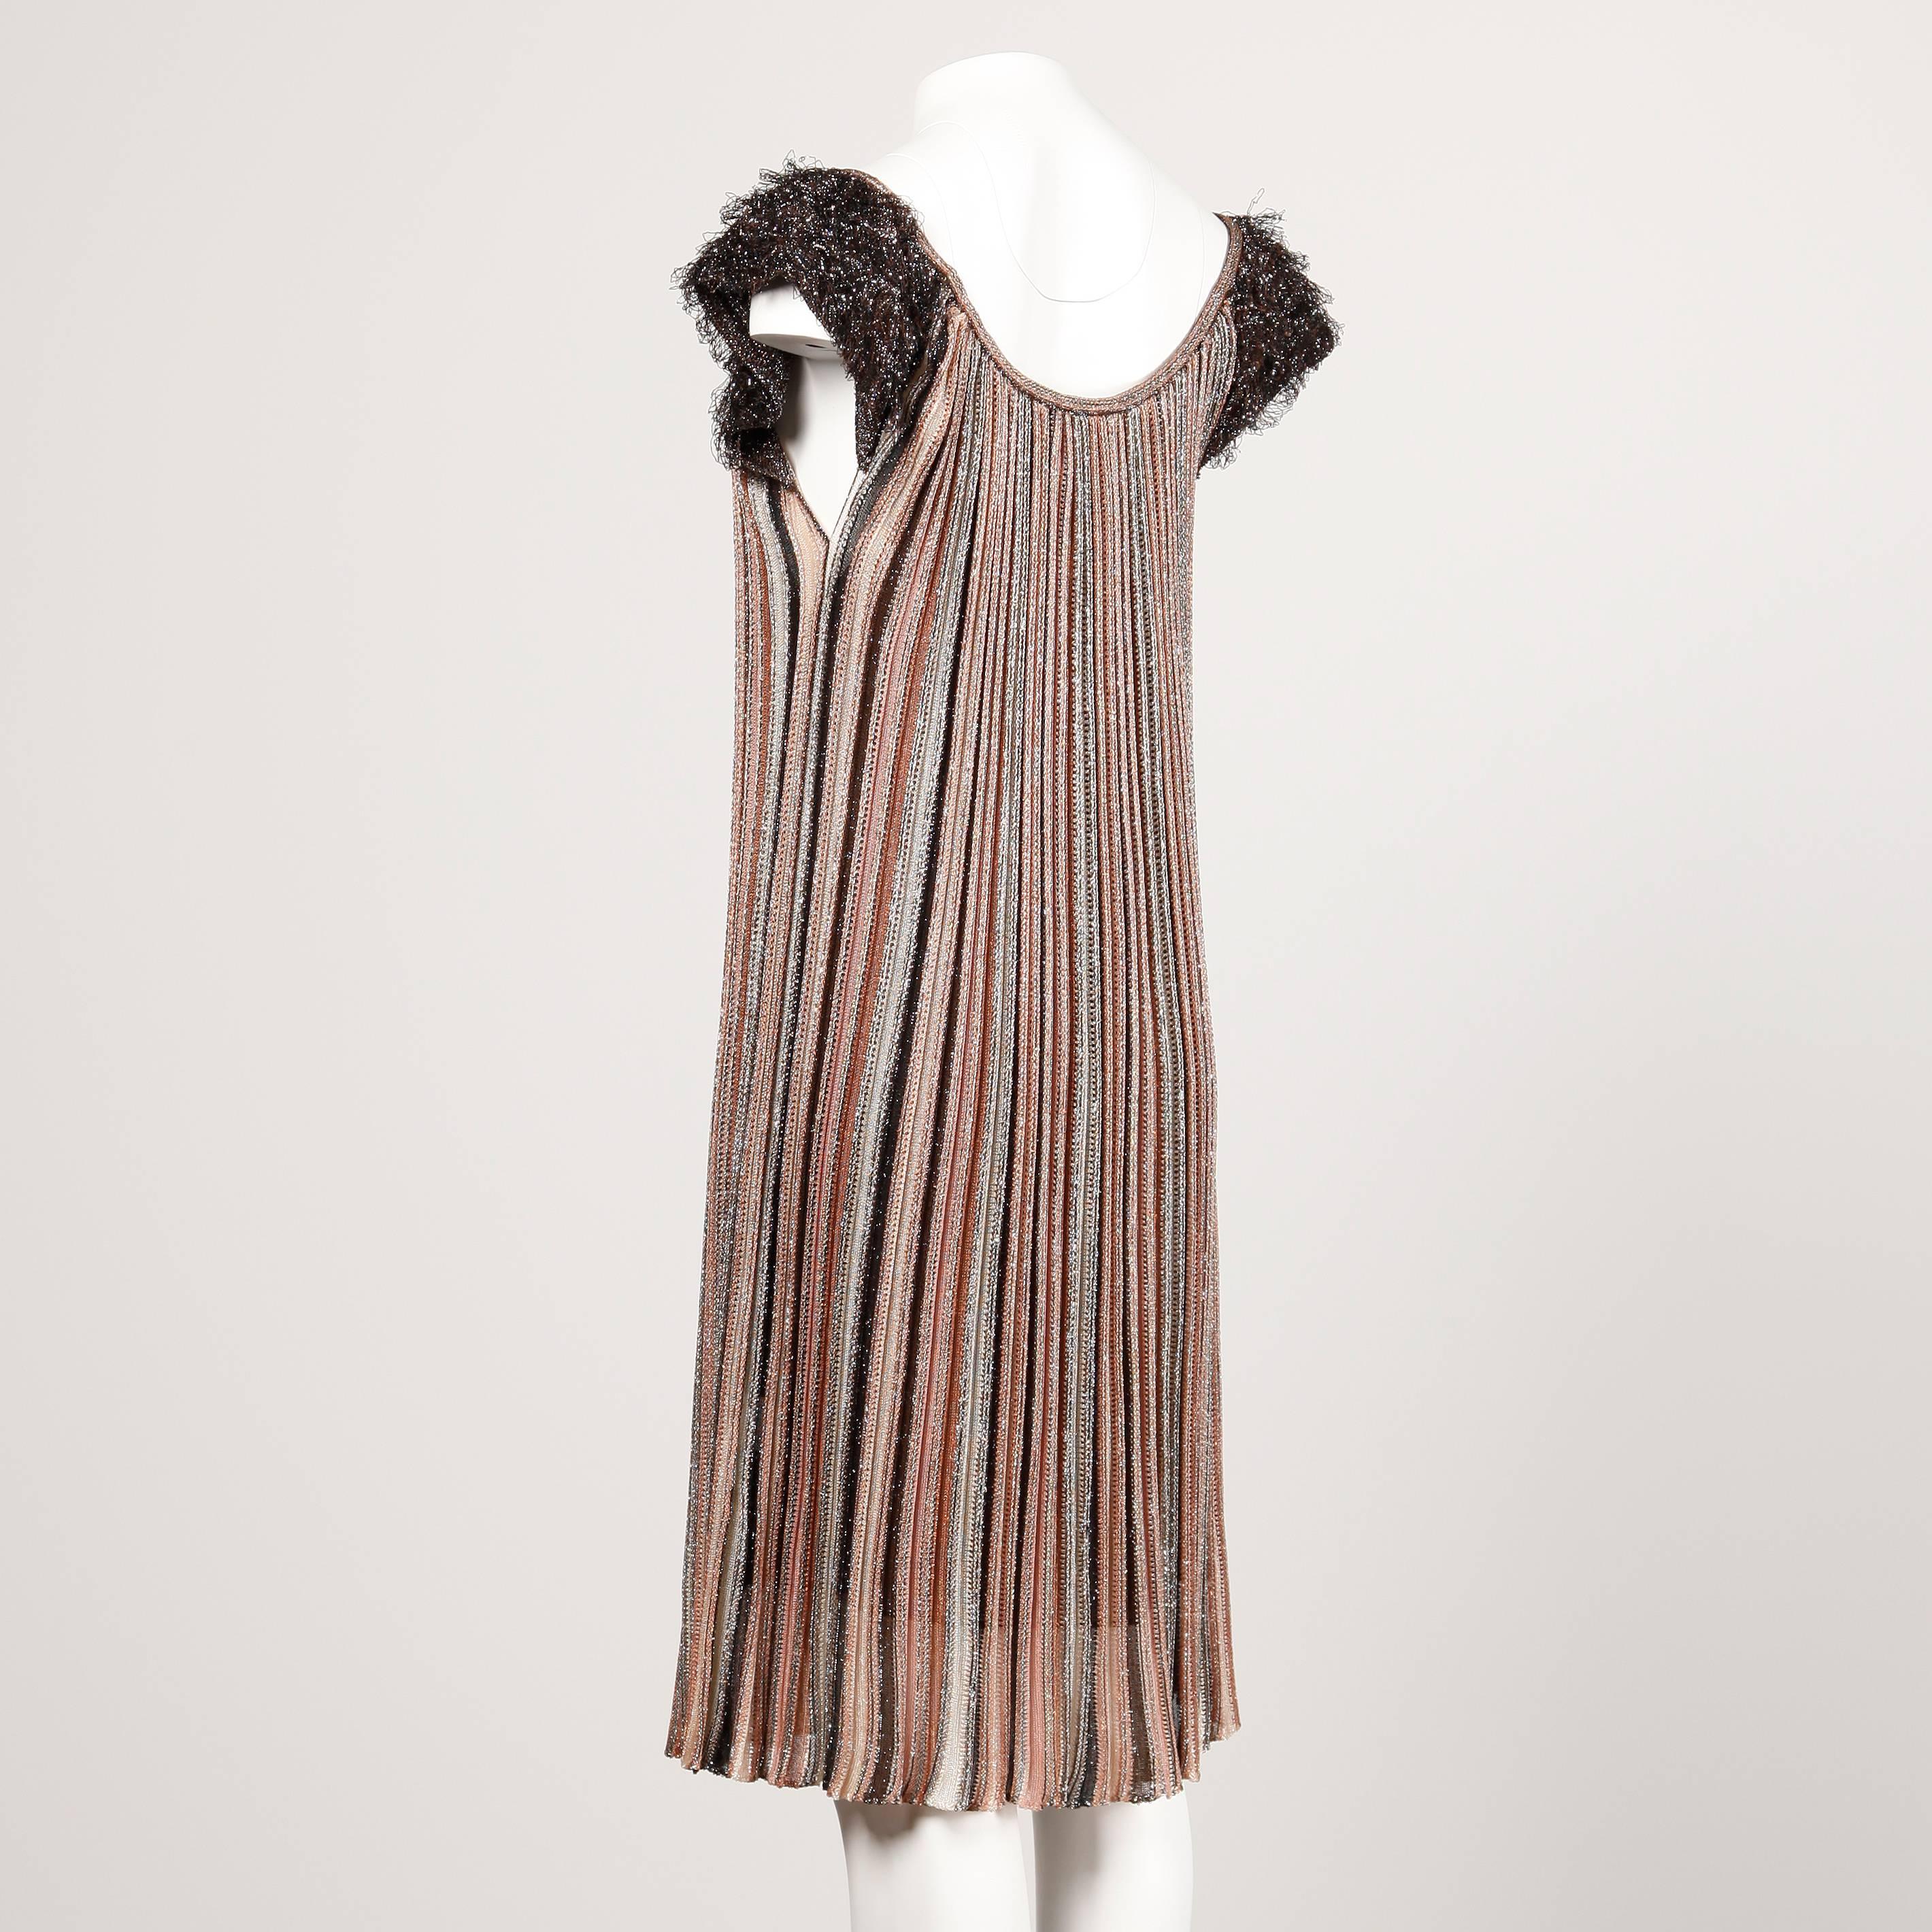 Sparkly metallic knit striped trapeze dress with shaggy looped fringe cap sleeves by Missoni.

Details: 

Fully Lined
No Marked Size
Estimated Size: S-M
Color: Black/ Brown/ Gold/ Peach/ Metallic Knit
Fabric: 100% Nylon
Label: M